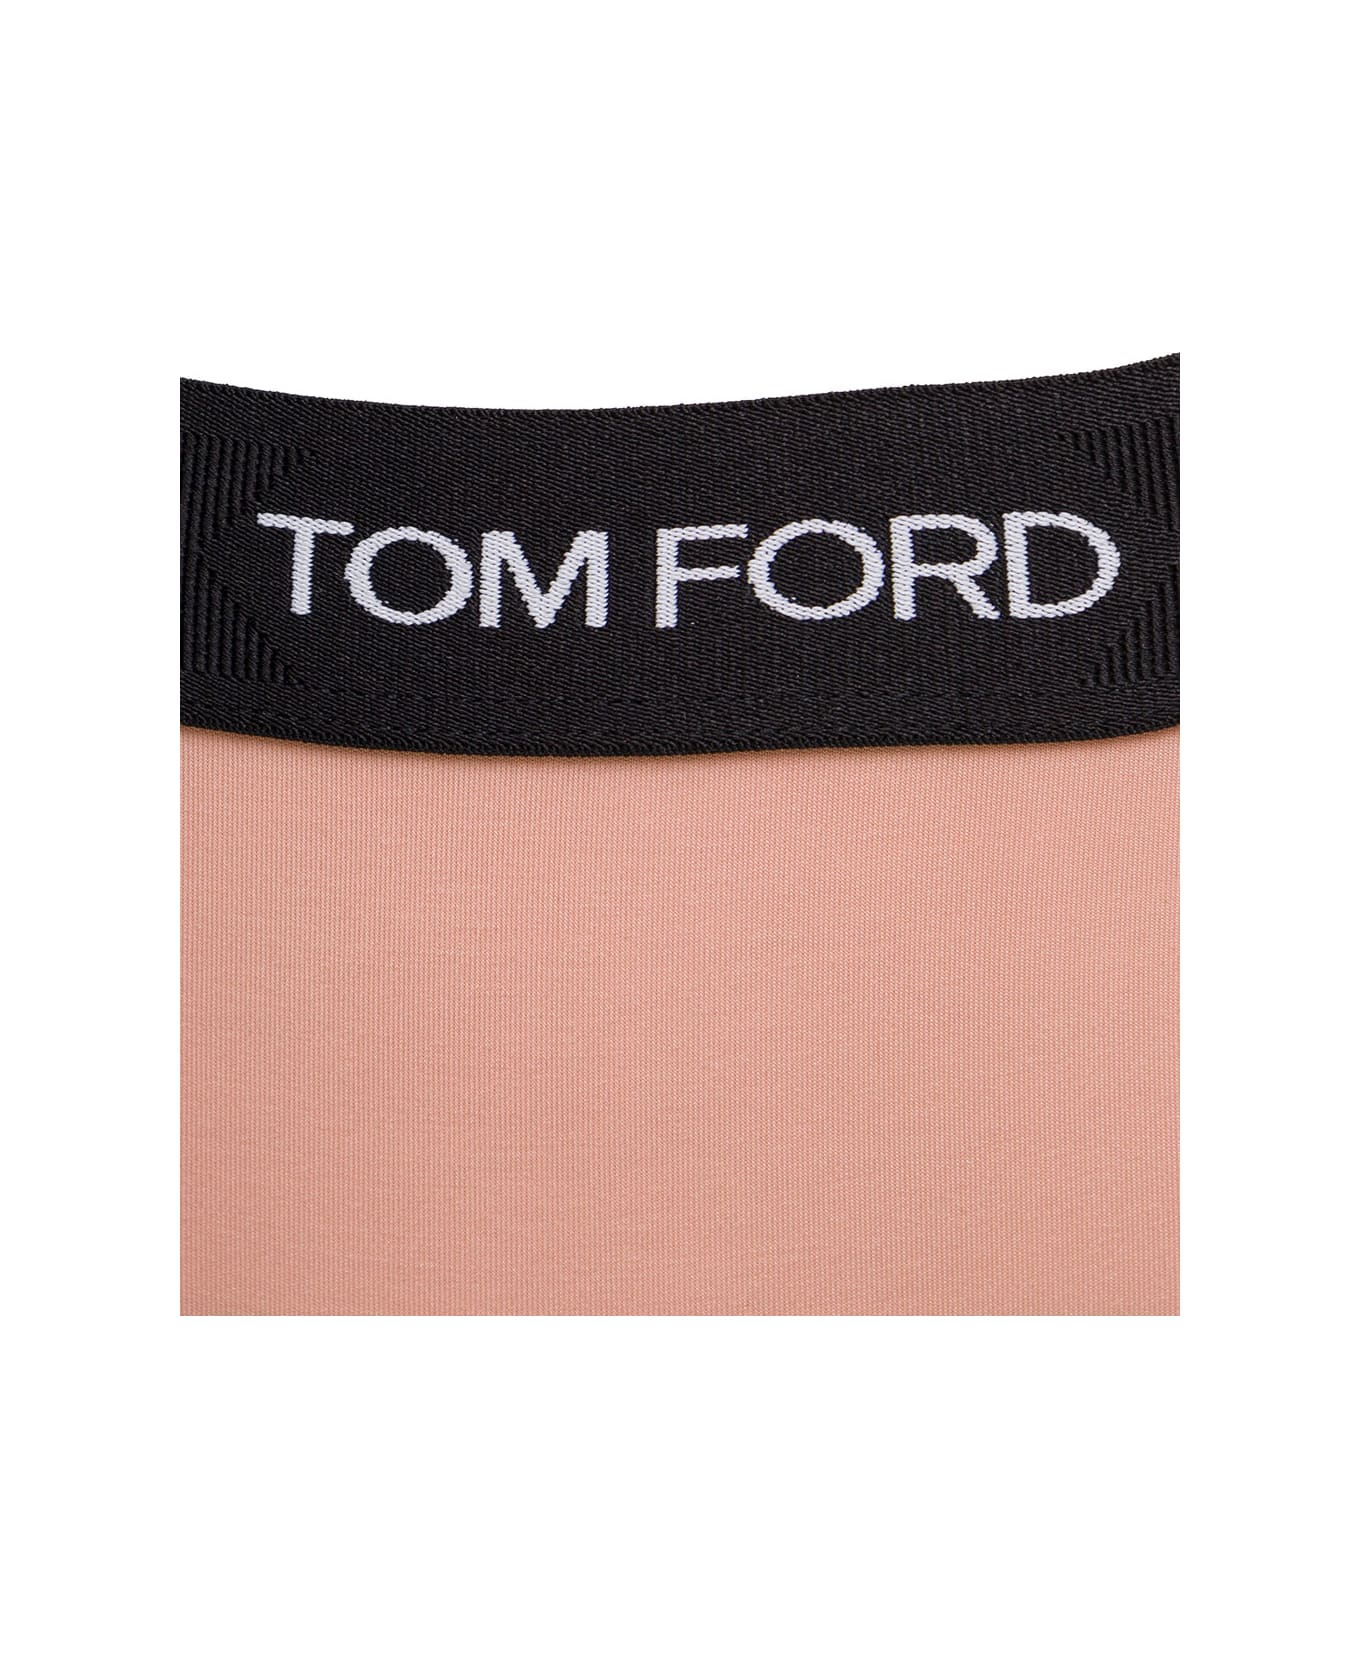 Tom Ford 'signature Boy Short' Beige Briefs With Logo Waistband In Stretch-jersey Woman - Pink